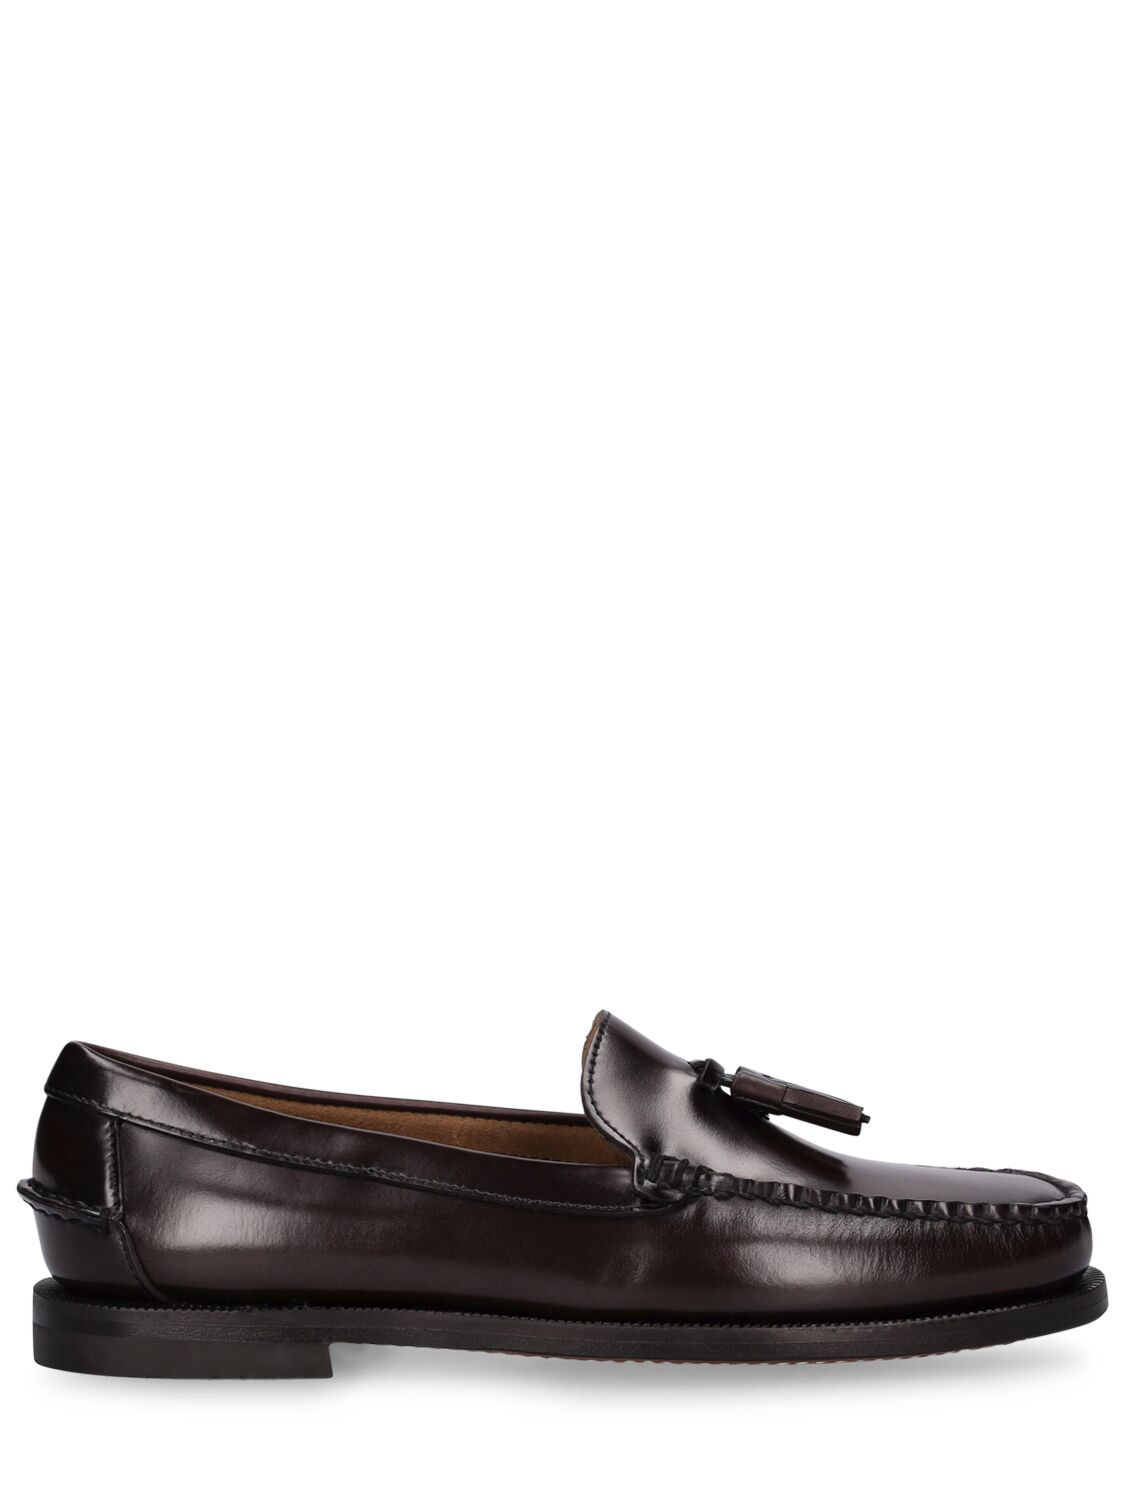 SEBAGO CLASSIC WILL LEATHER TASSELS LOAFERS